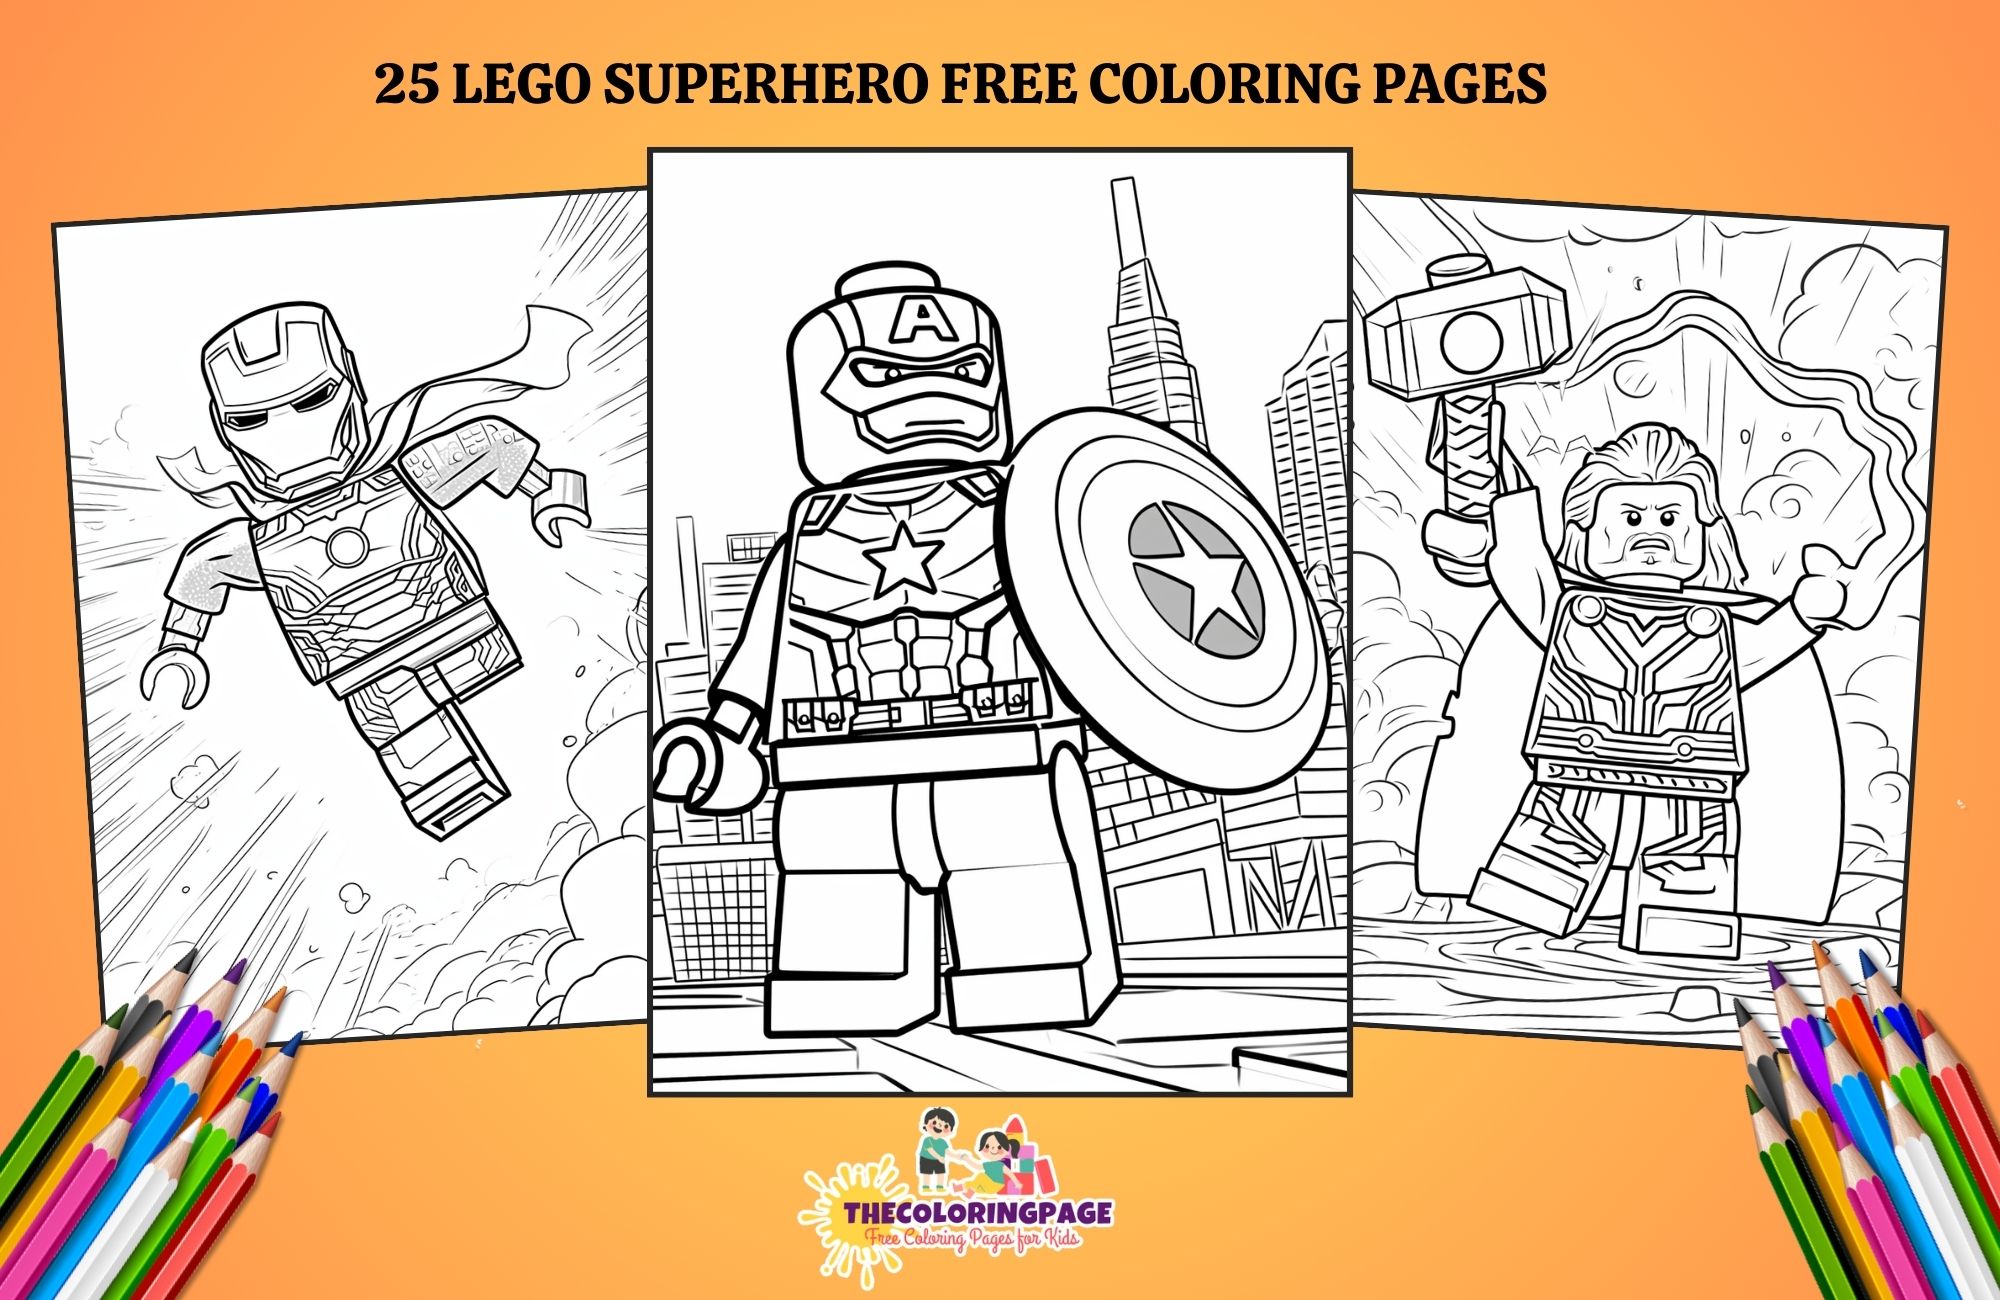 25 Free Lego Superhero Coloring Pages For Kids